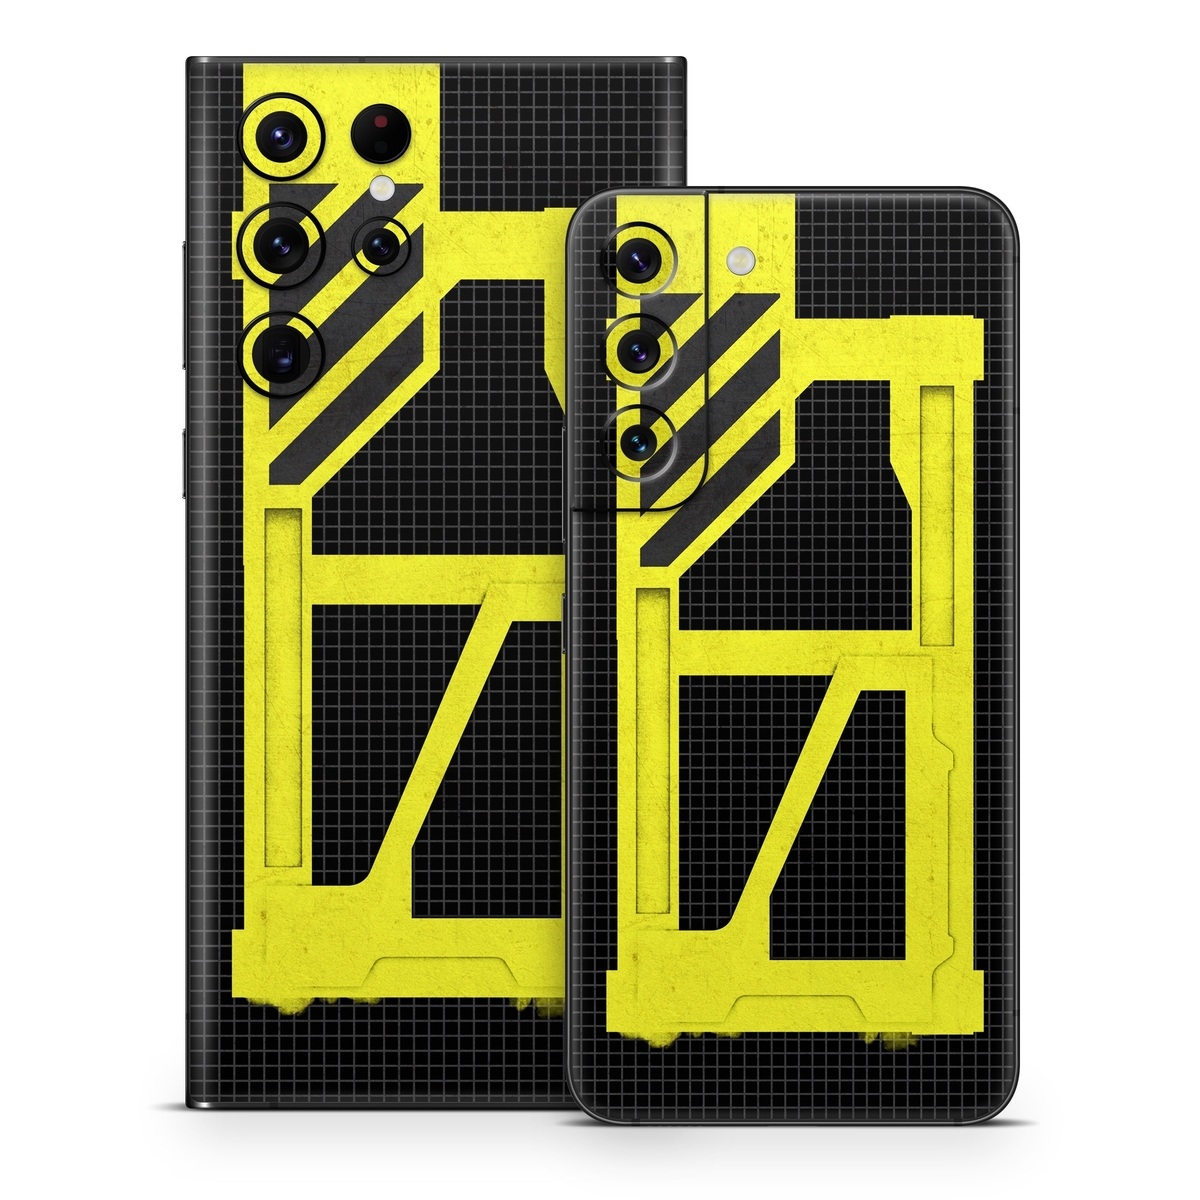 Samsung Galaxy S22 Series Skin design of Yellow, Green, Font, Pattern, Graphic design, with black, yellow, gray, blue, green colors